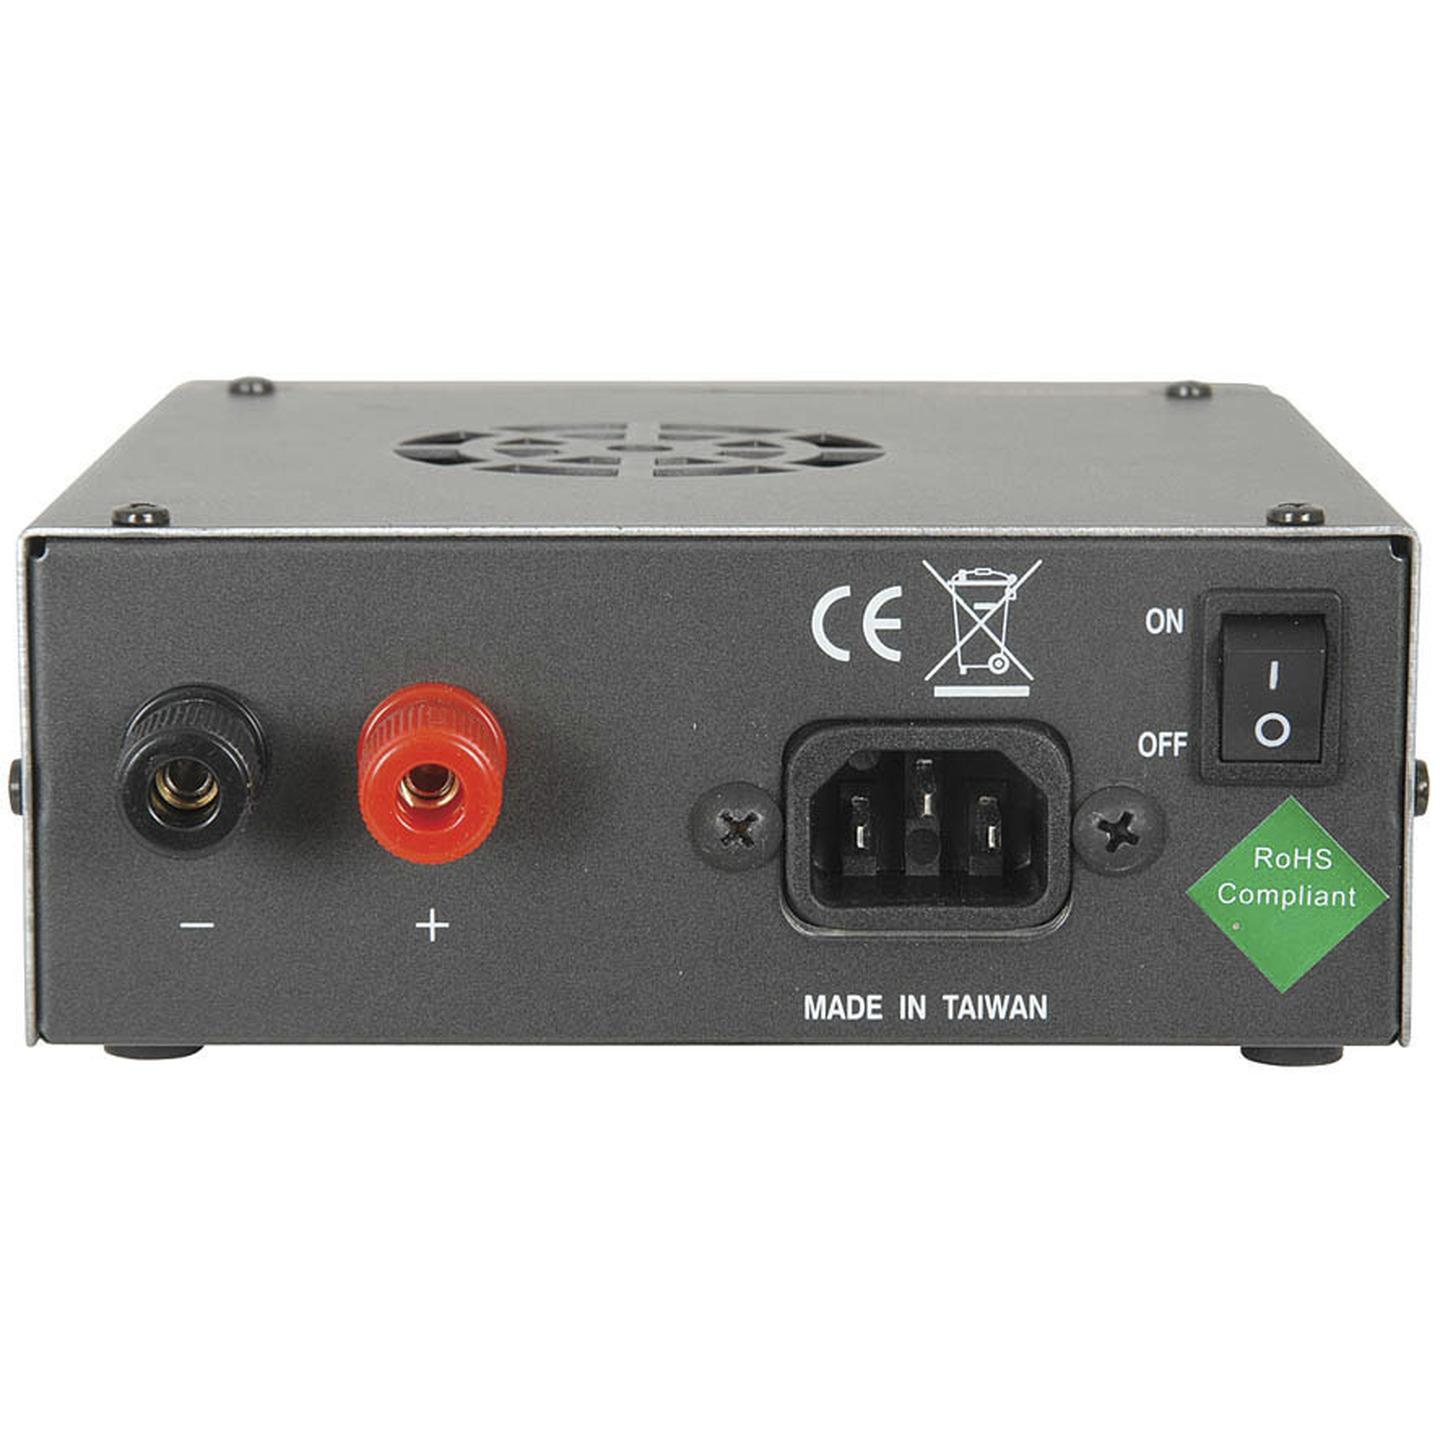 Compact Switchmode Laboratory Power Supply